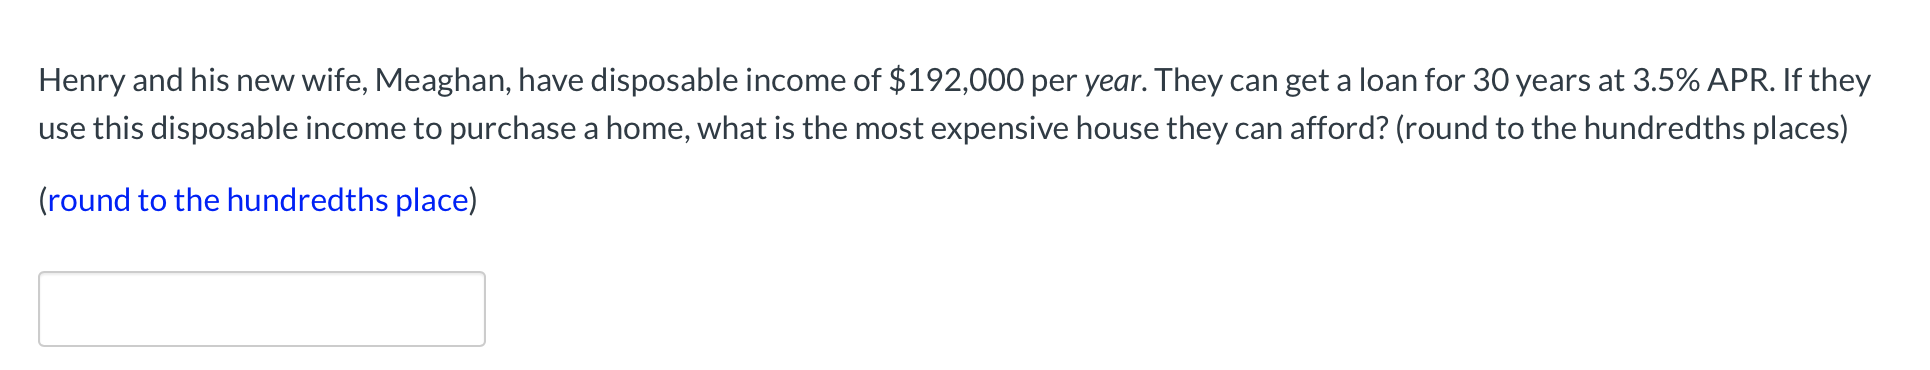 Henry and his new wife, Meaghan, have disposable income of $192,000 per year. They can get a loan for 30 years at 3.5% APR. If they
use this disposable income to purchase a home, what is the most expensive house they can afford? (round to the hundredths places)
(round to the hundredths place)
